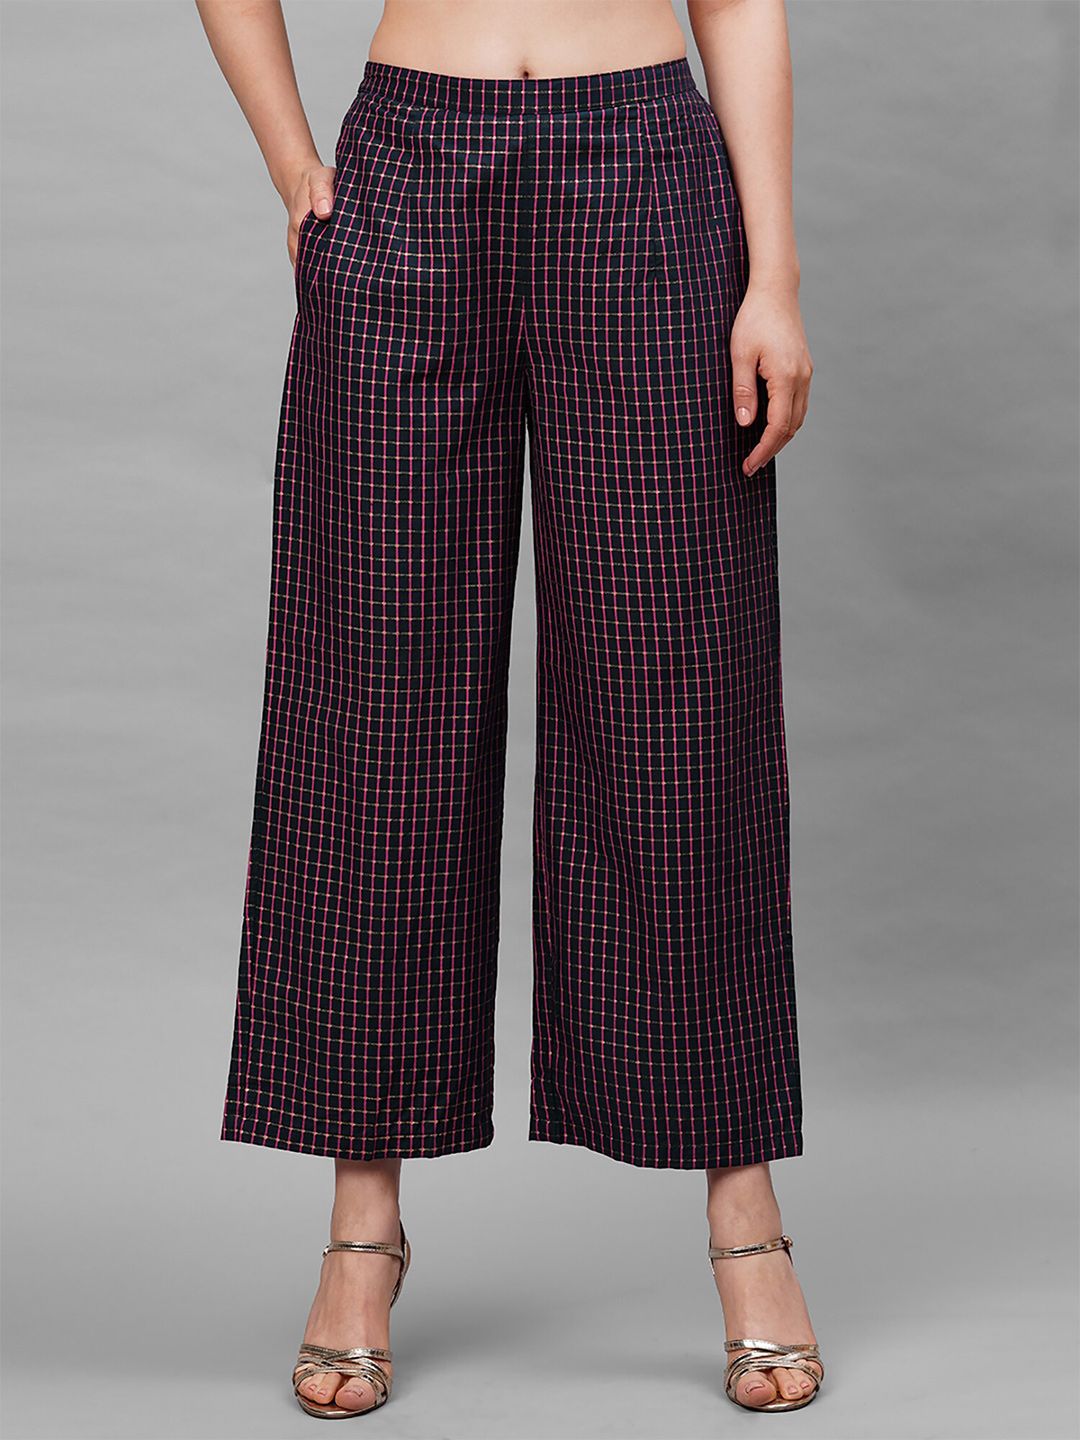 Indo Era Women Navy Blue & Pink Checked Cotton Ethnic Palazzos Price in India